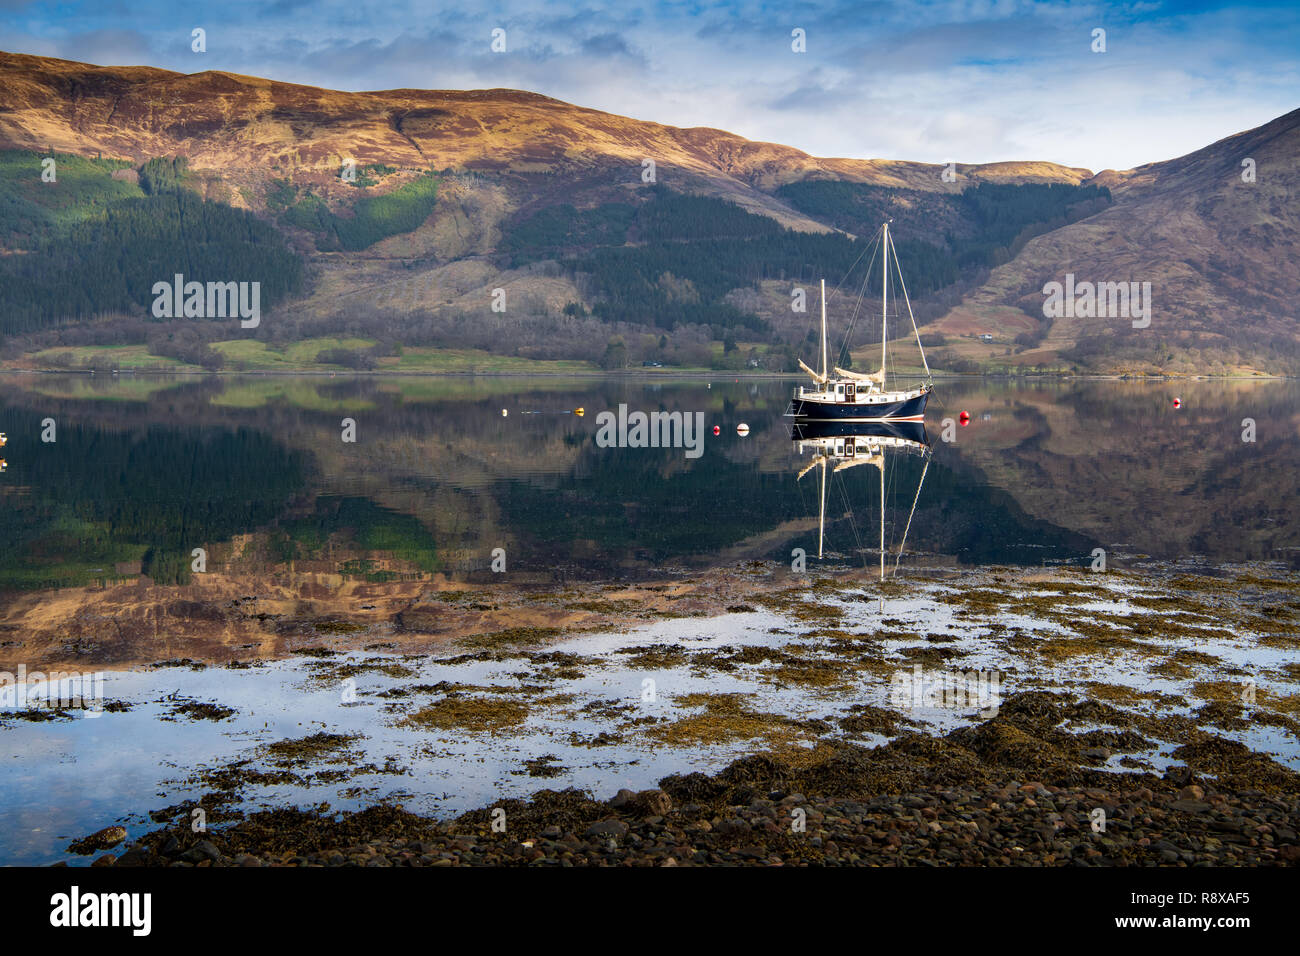 Blue sailboat reflected in the waters of Loch Leven, Scotland. Stock Photo